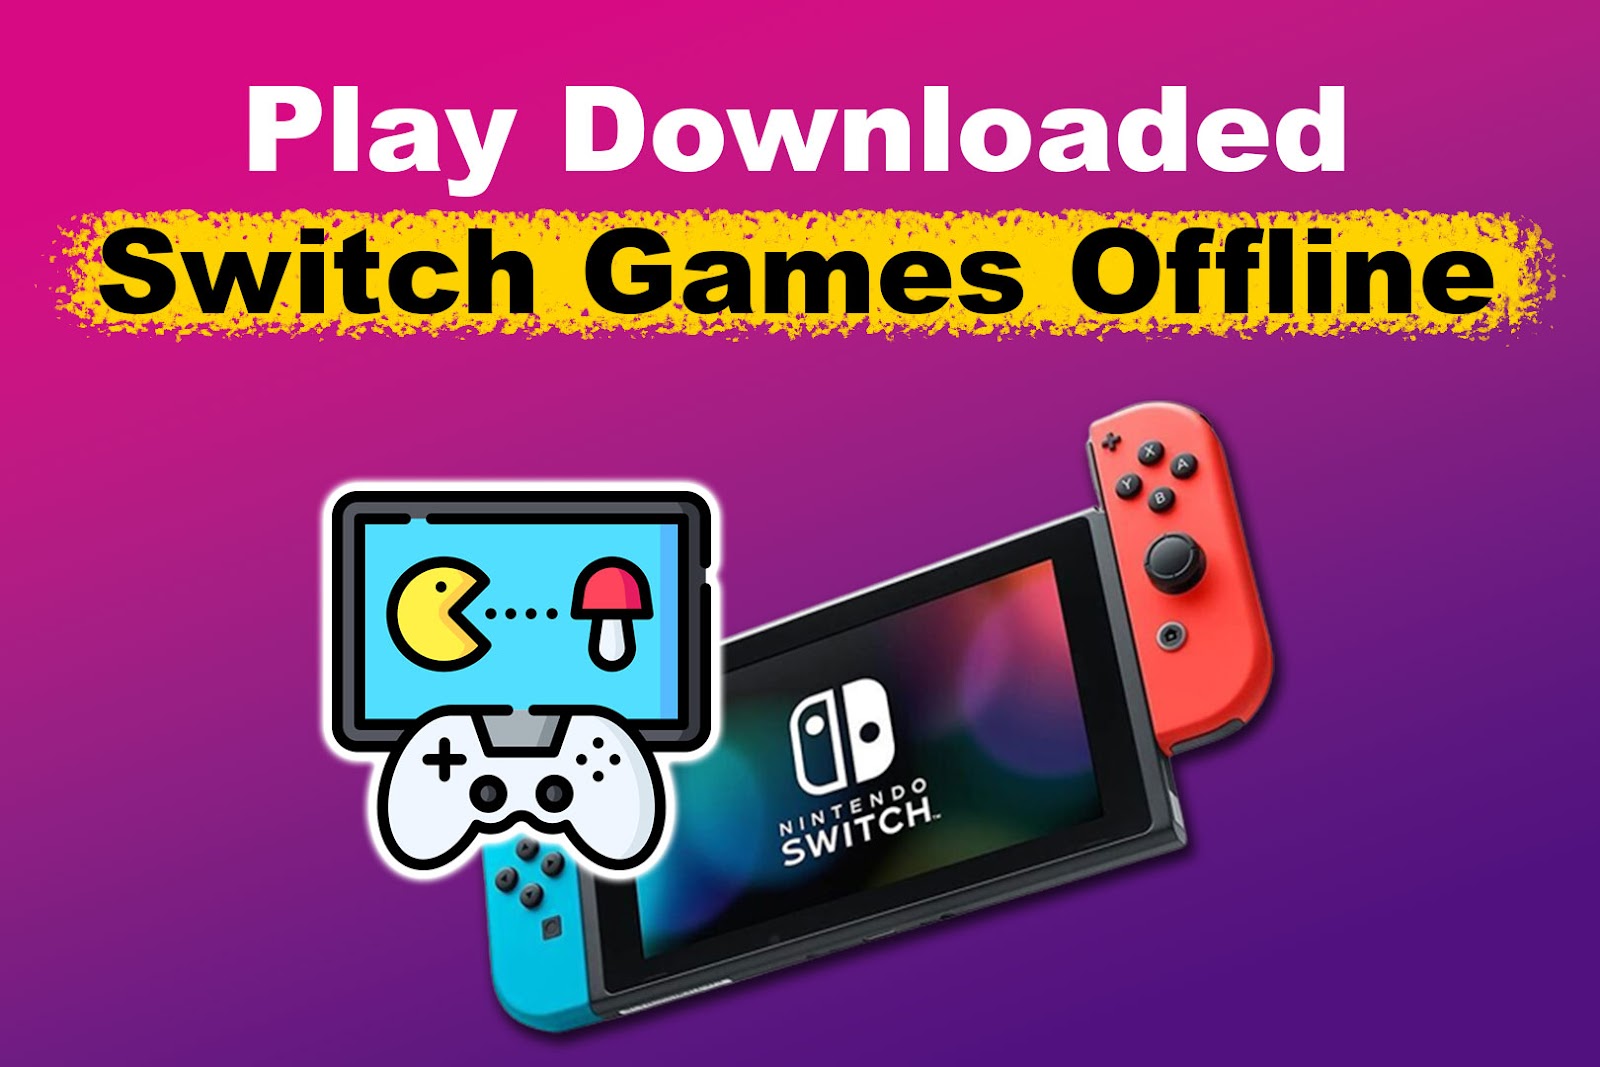 Play Downloaded Switch Games Offline [The Easy Way!]